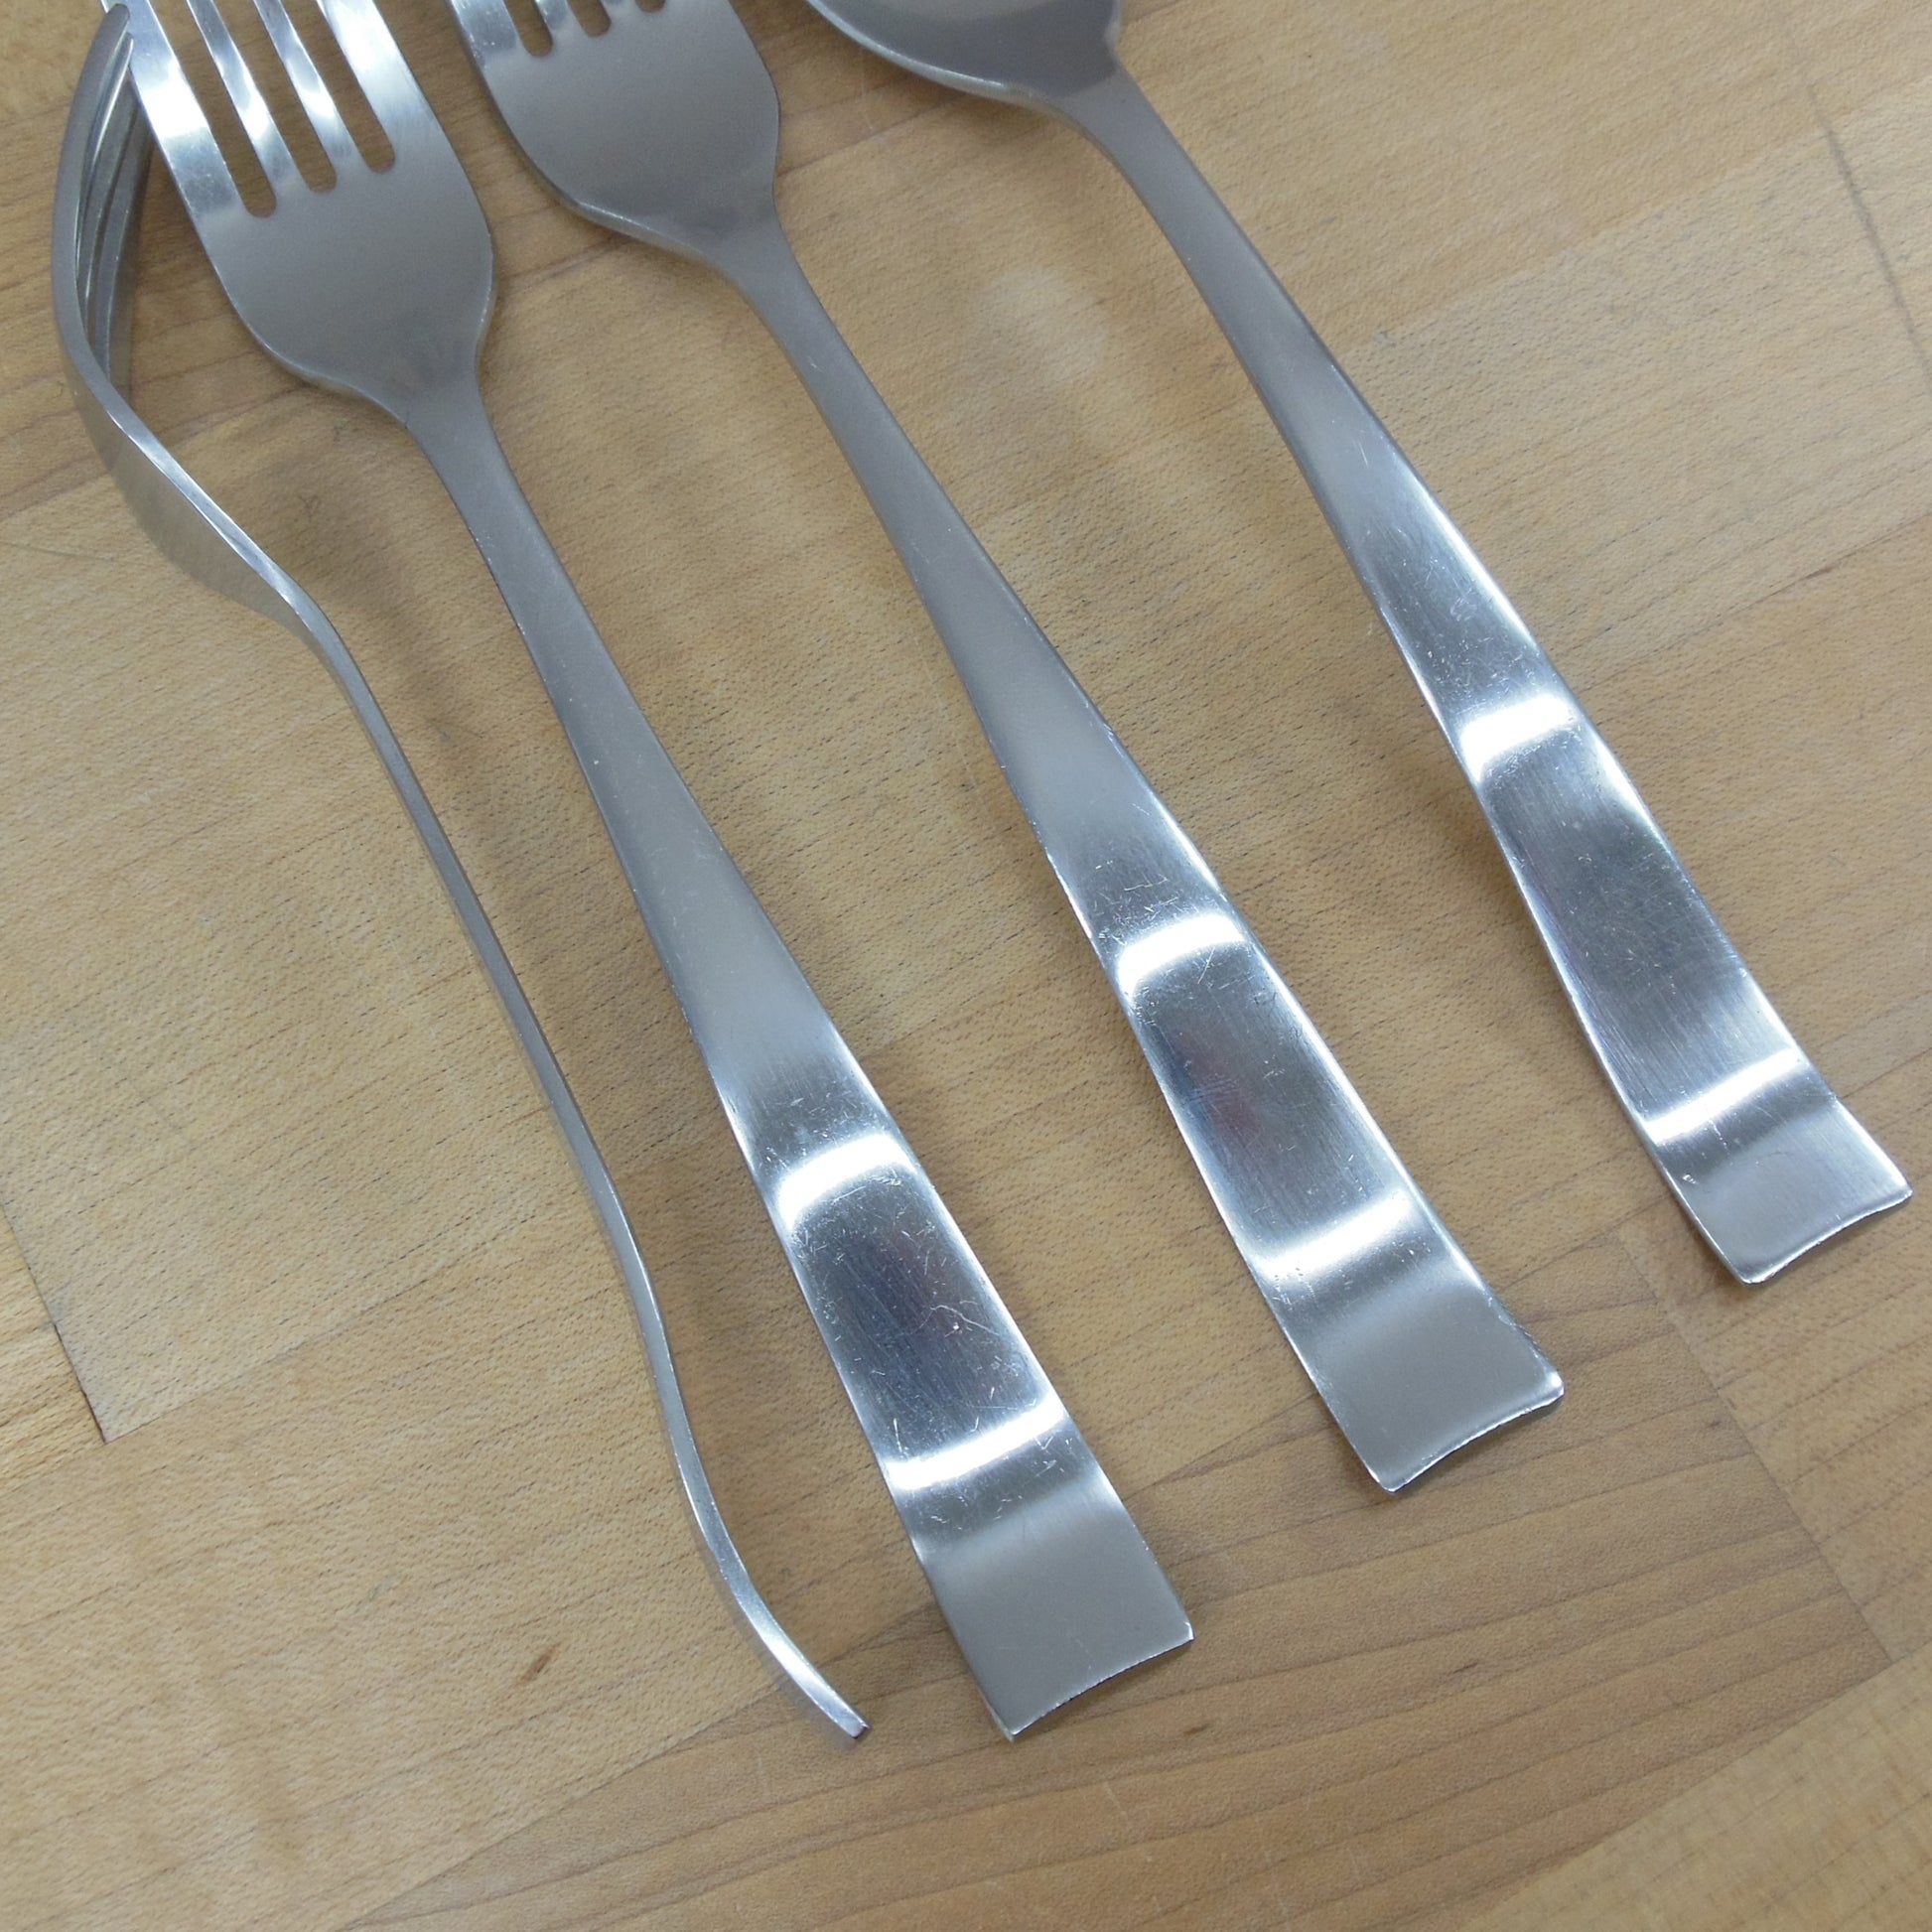 Gourmet Settings Hotel Stainless 4 Lot Salad Dinner Forks Spoon Place Soup